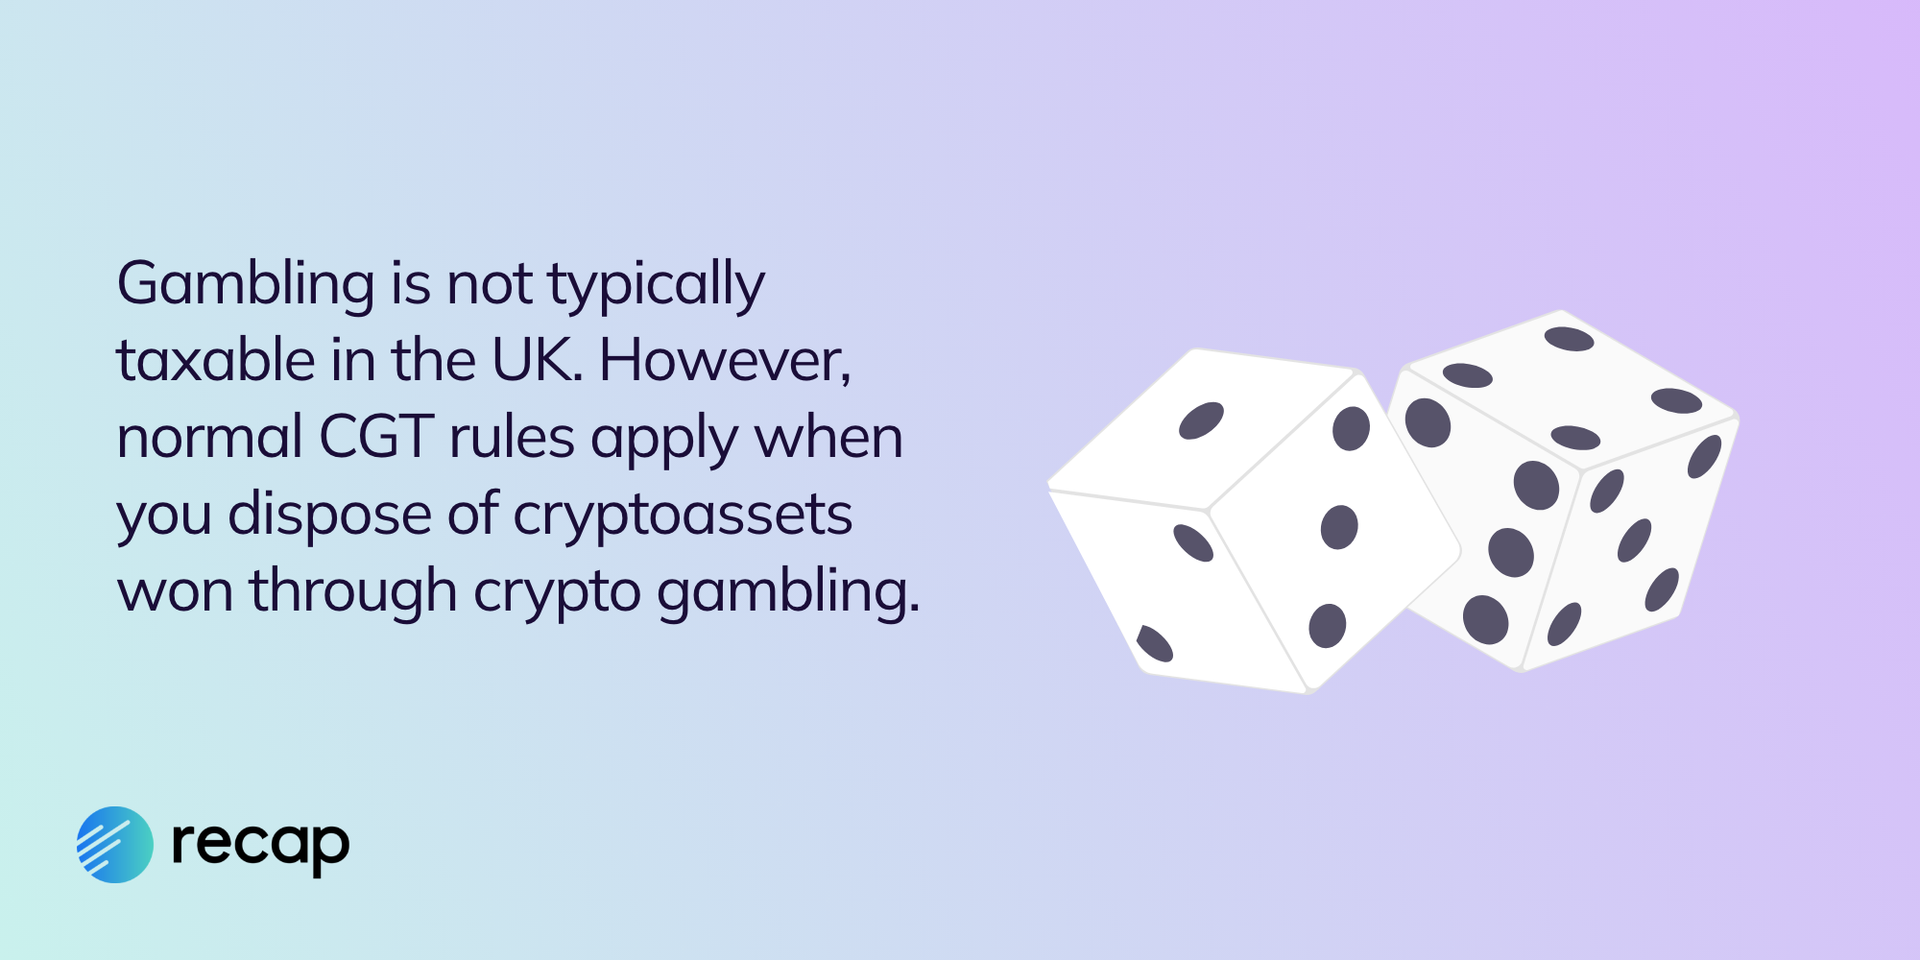 Recap infographic stating that crypto won through gambling is not taxable, but is subject to captal gains tax when eventually disposed of.